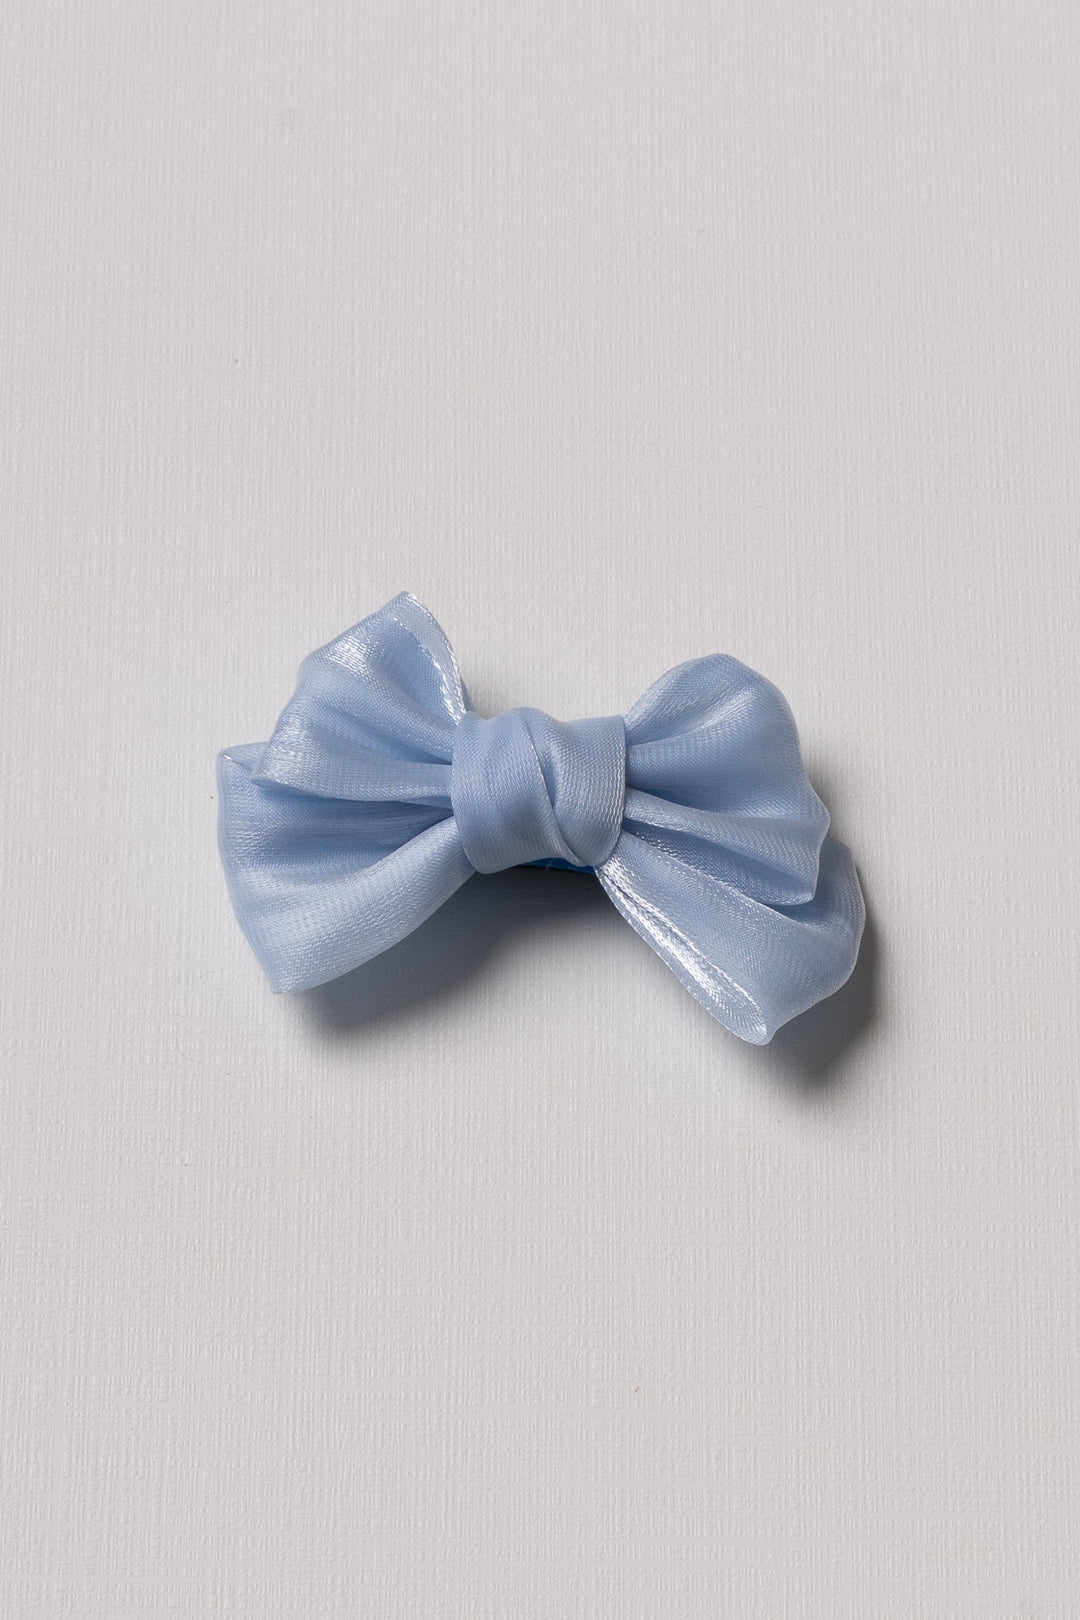 The Nesavu Hair Clip Sky Serenity: Pastel Blue Satin Bow Clip Nesavu Blue JHCL77F Pastel Blue Satin Bow Hair Clip for Girls | Delicate Accessory for Every Occasion | The Nesavu